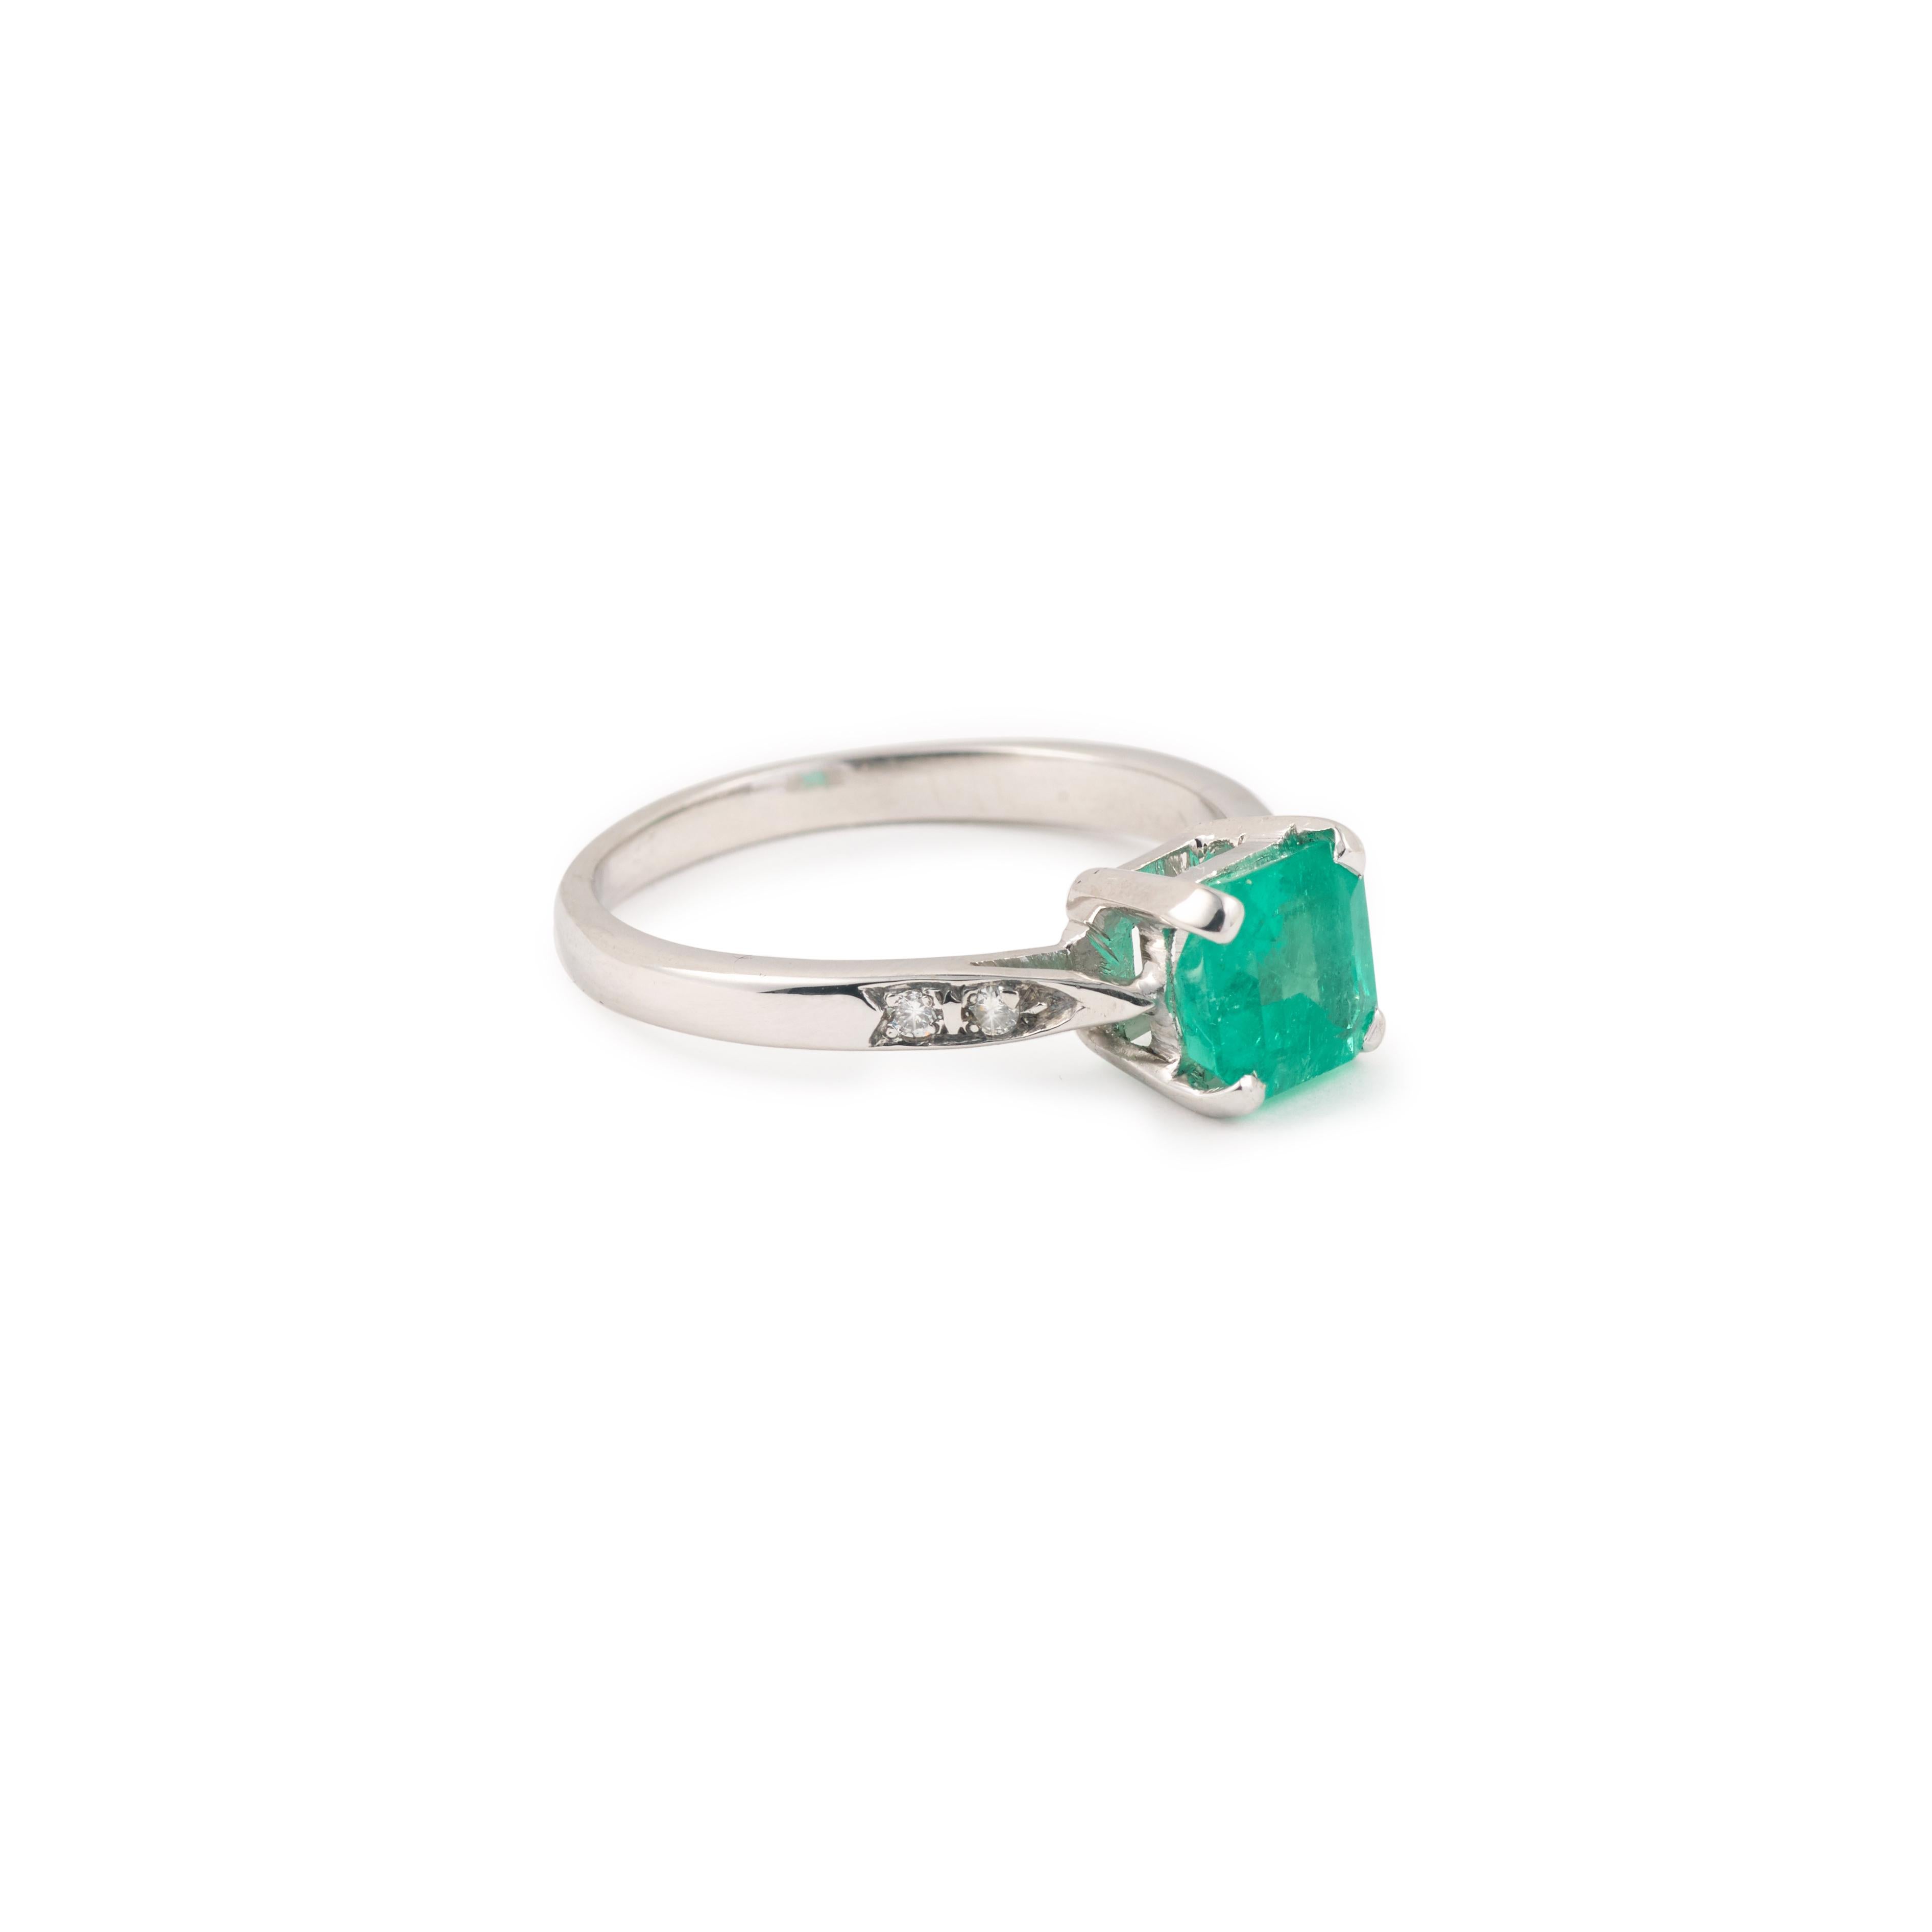 Amazing vintage square cut Colombian emerald  set on a vintage white gold ring paved with brilliant diamonds.

Emerald certified by the GemParis laboratory. (Colombian origin, minor oil)
Beautiful intense green color!

Weight of the emerald : 1.36